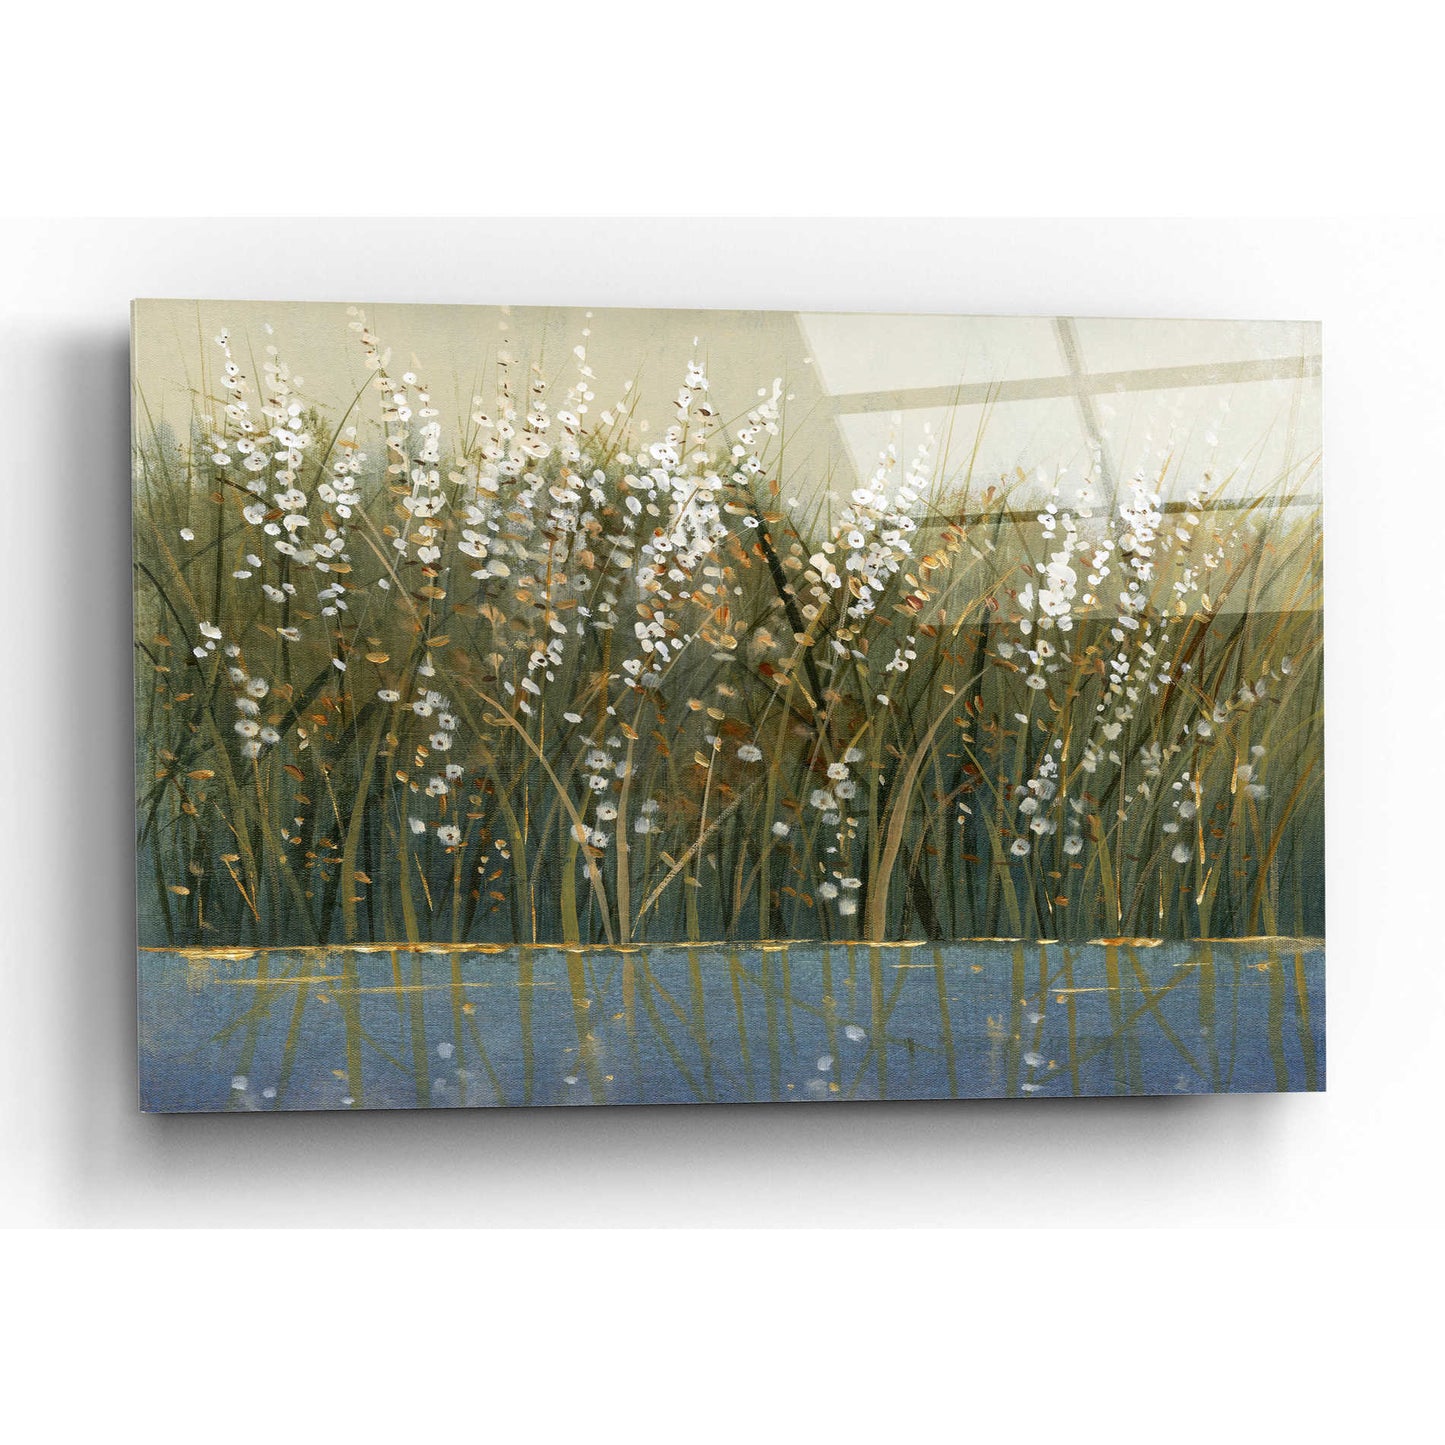 Epic Art 'By the Tall Grass I' by Tim O'Toole, Acrylic Glass Wall Art,24x16